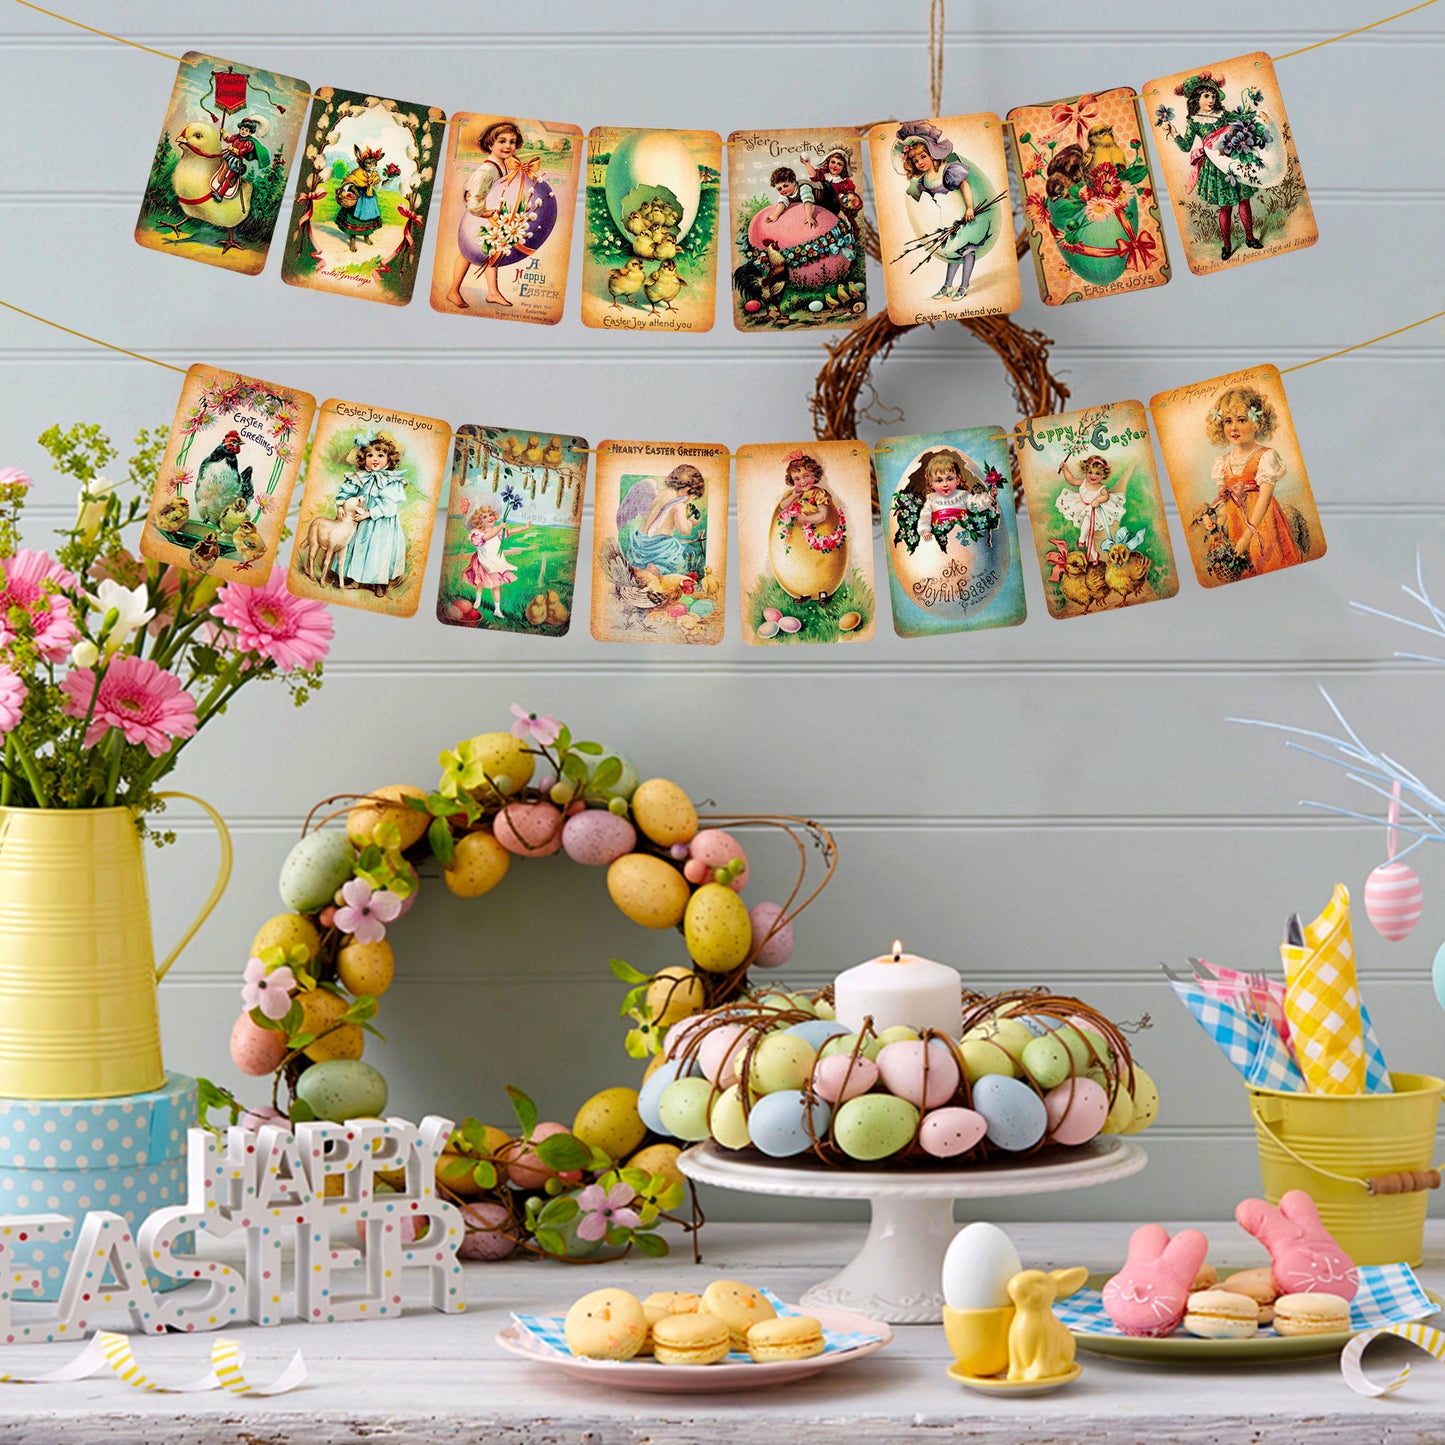 2Pcs Easter Hanging Decoration Vintage Style Wooden Banner, Easter Hanging Bunting Garlands Ornaments Decorations, Holiday Party Supplies Window Fireplace Home Indoor Outdoor Tree Decor